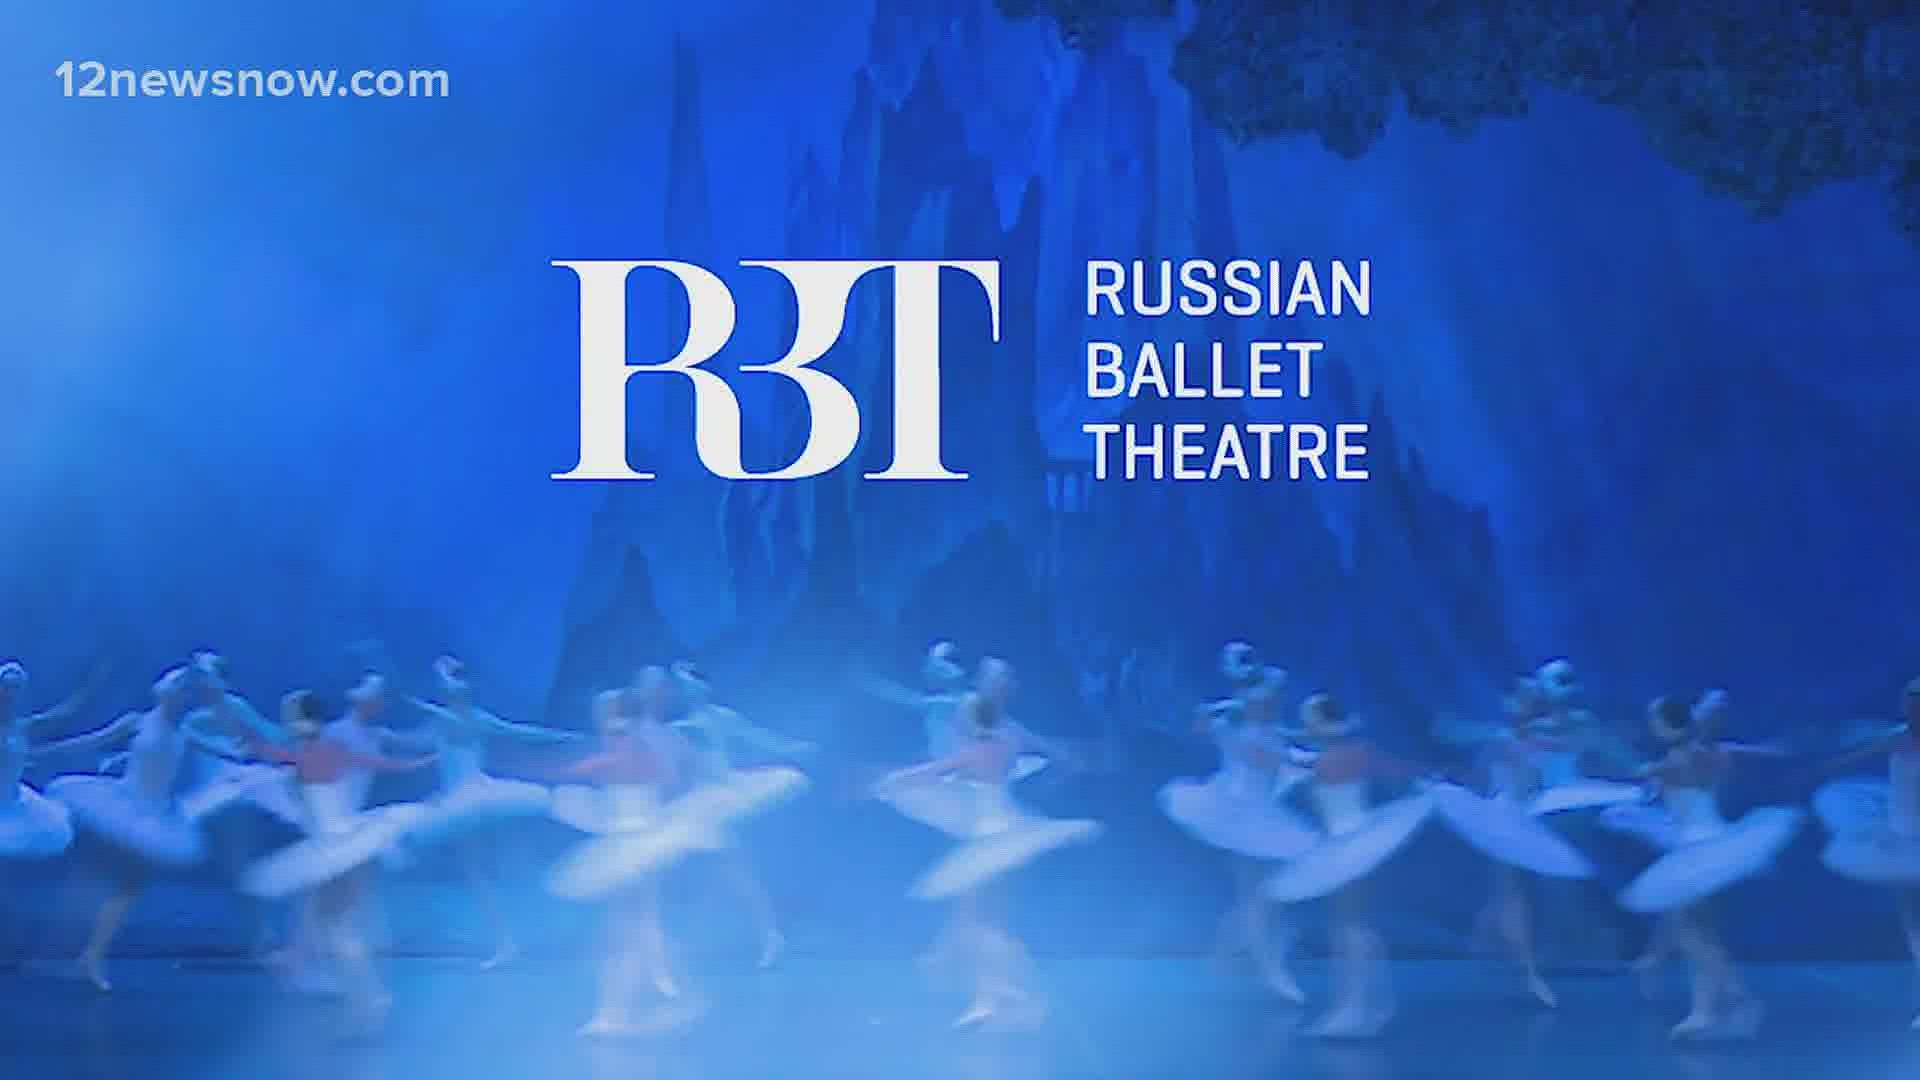 The Russian Ballet Theatre Company is set to come to Beaumont soon and it has left community members with questions.